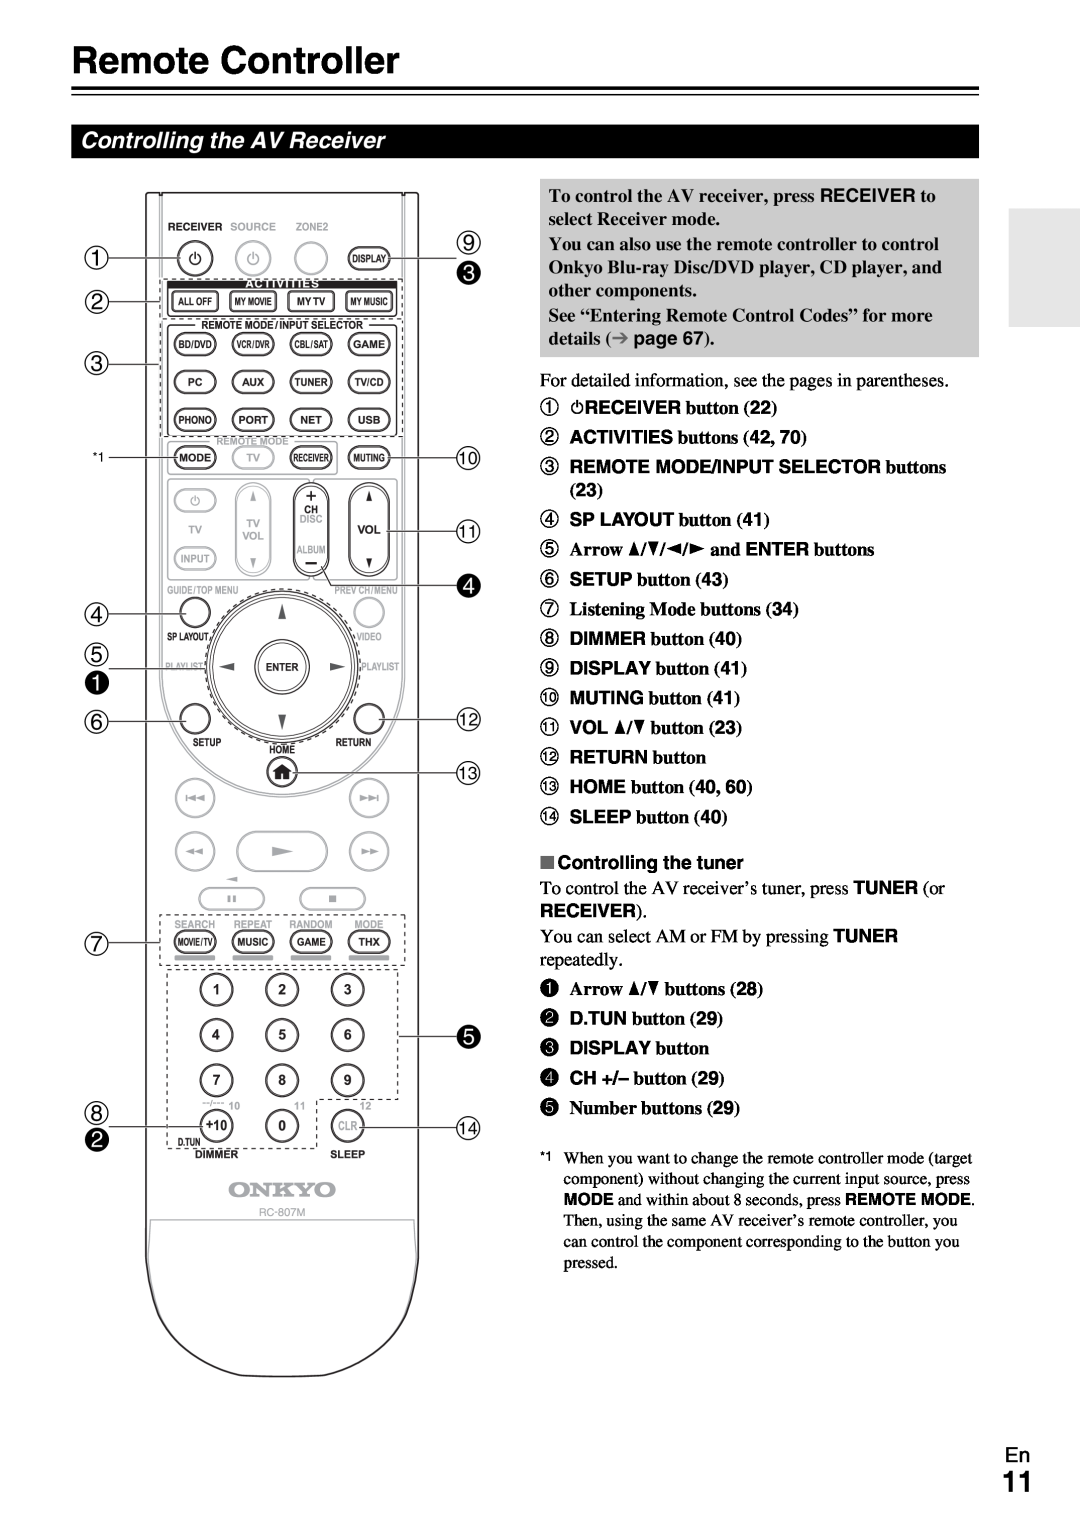 Onkyo HT-RC370 instruction manual Remote Controller 